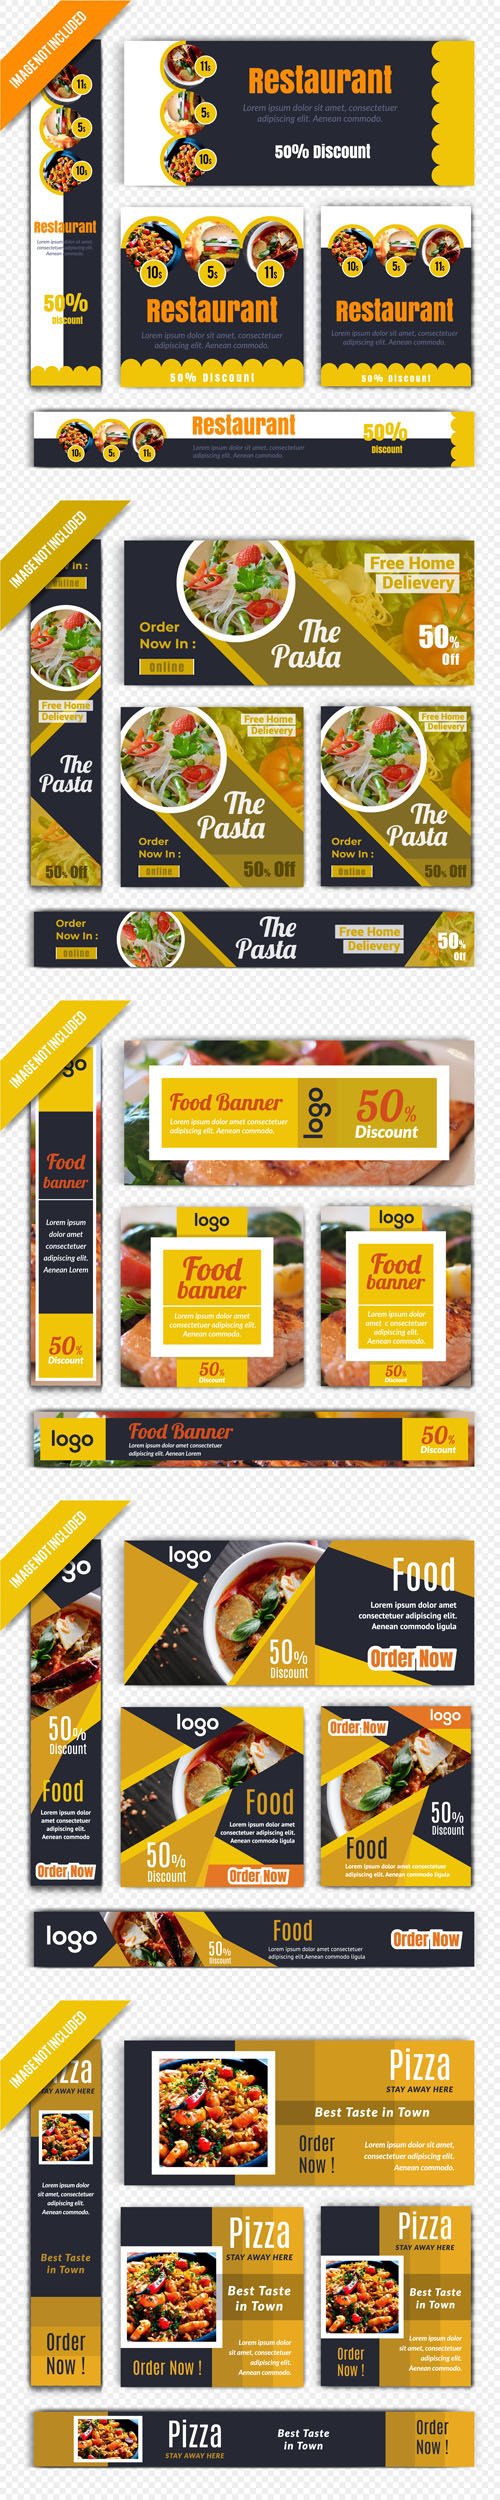 Food & Restaurant Banners Templates in Vector